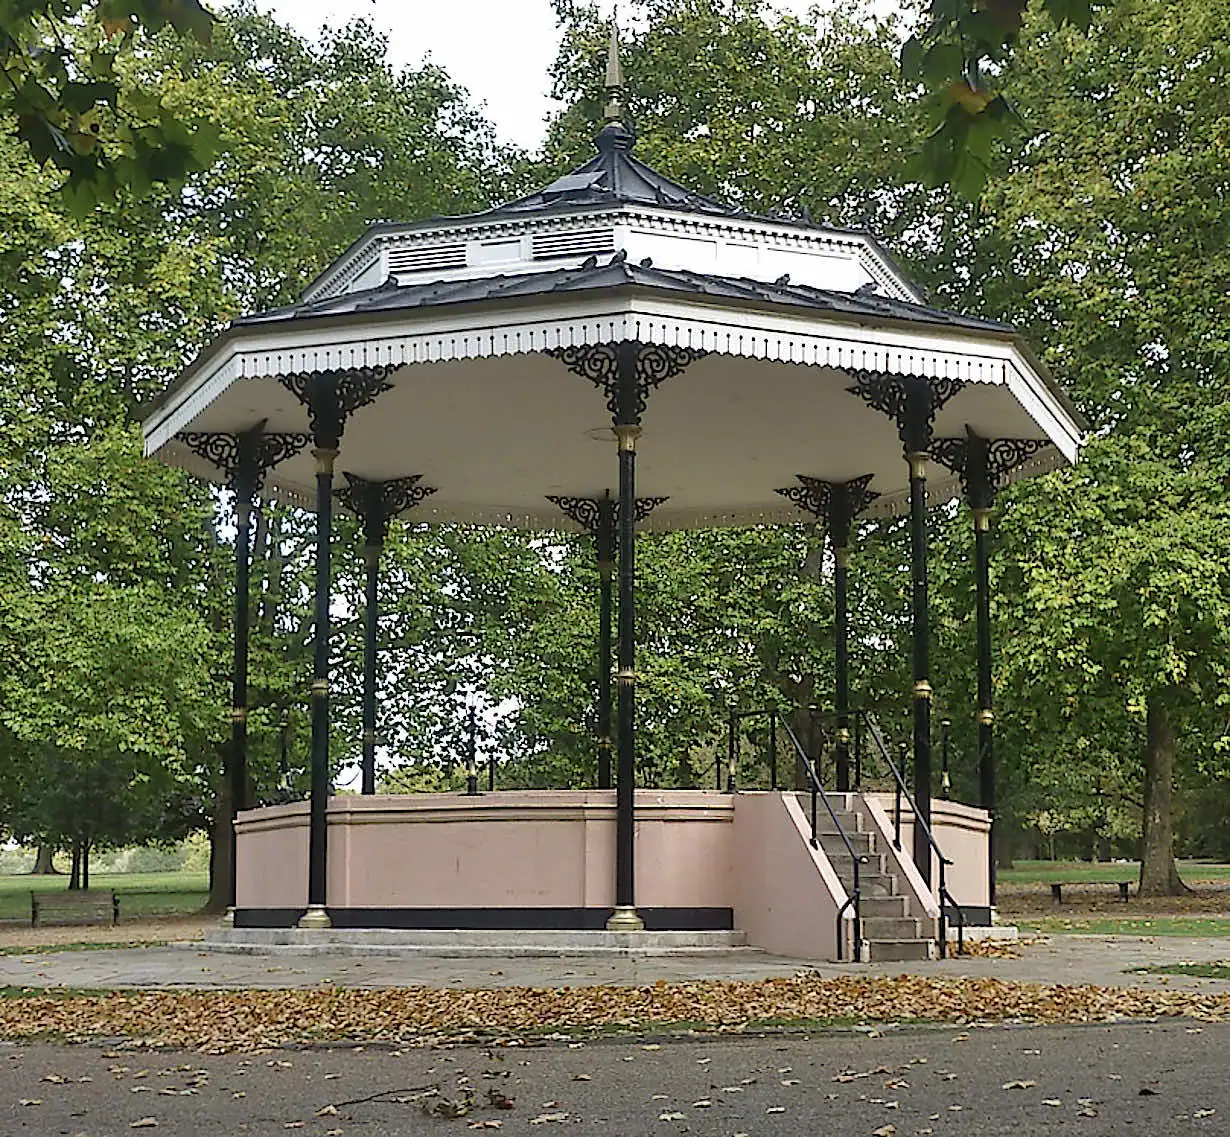 The Hyde Park Bandstand